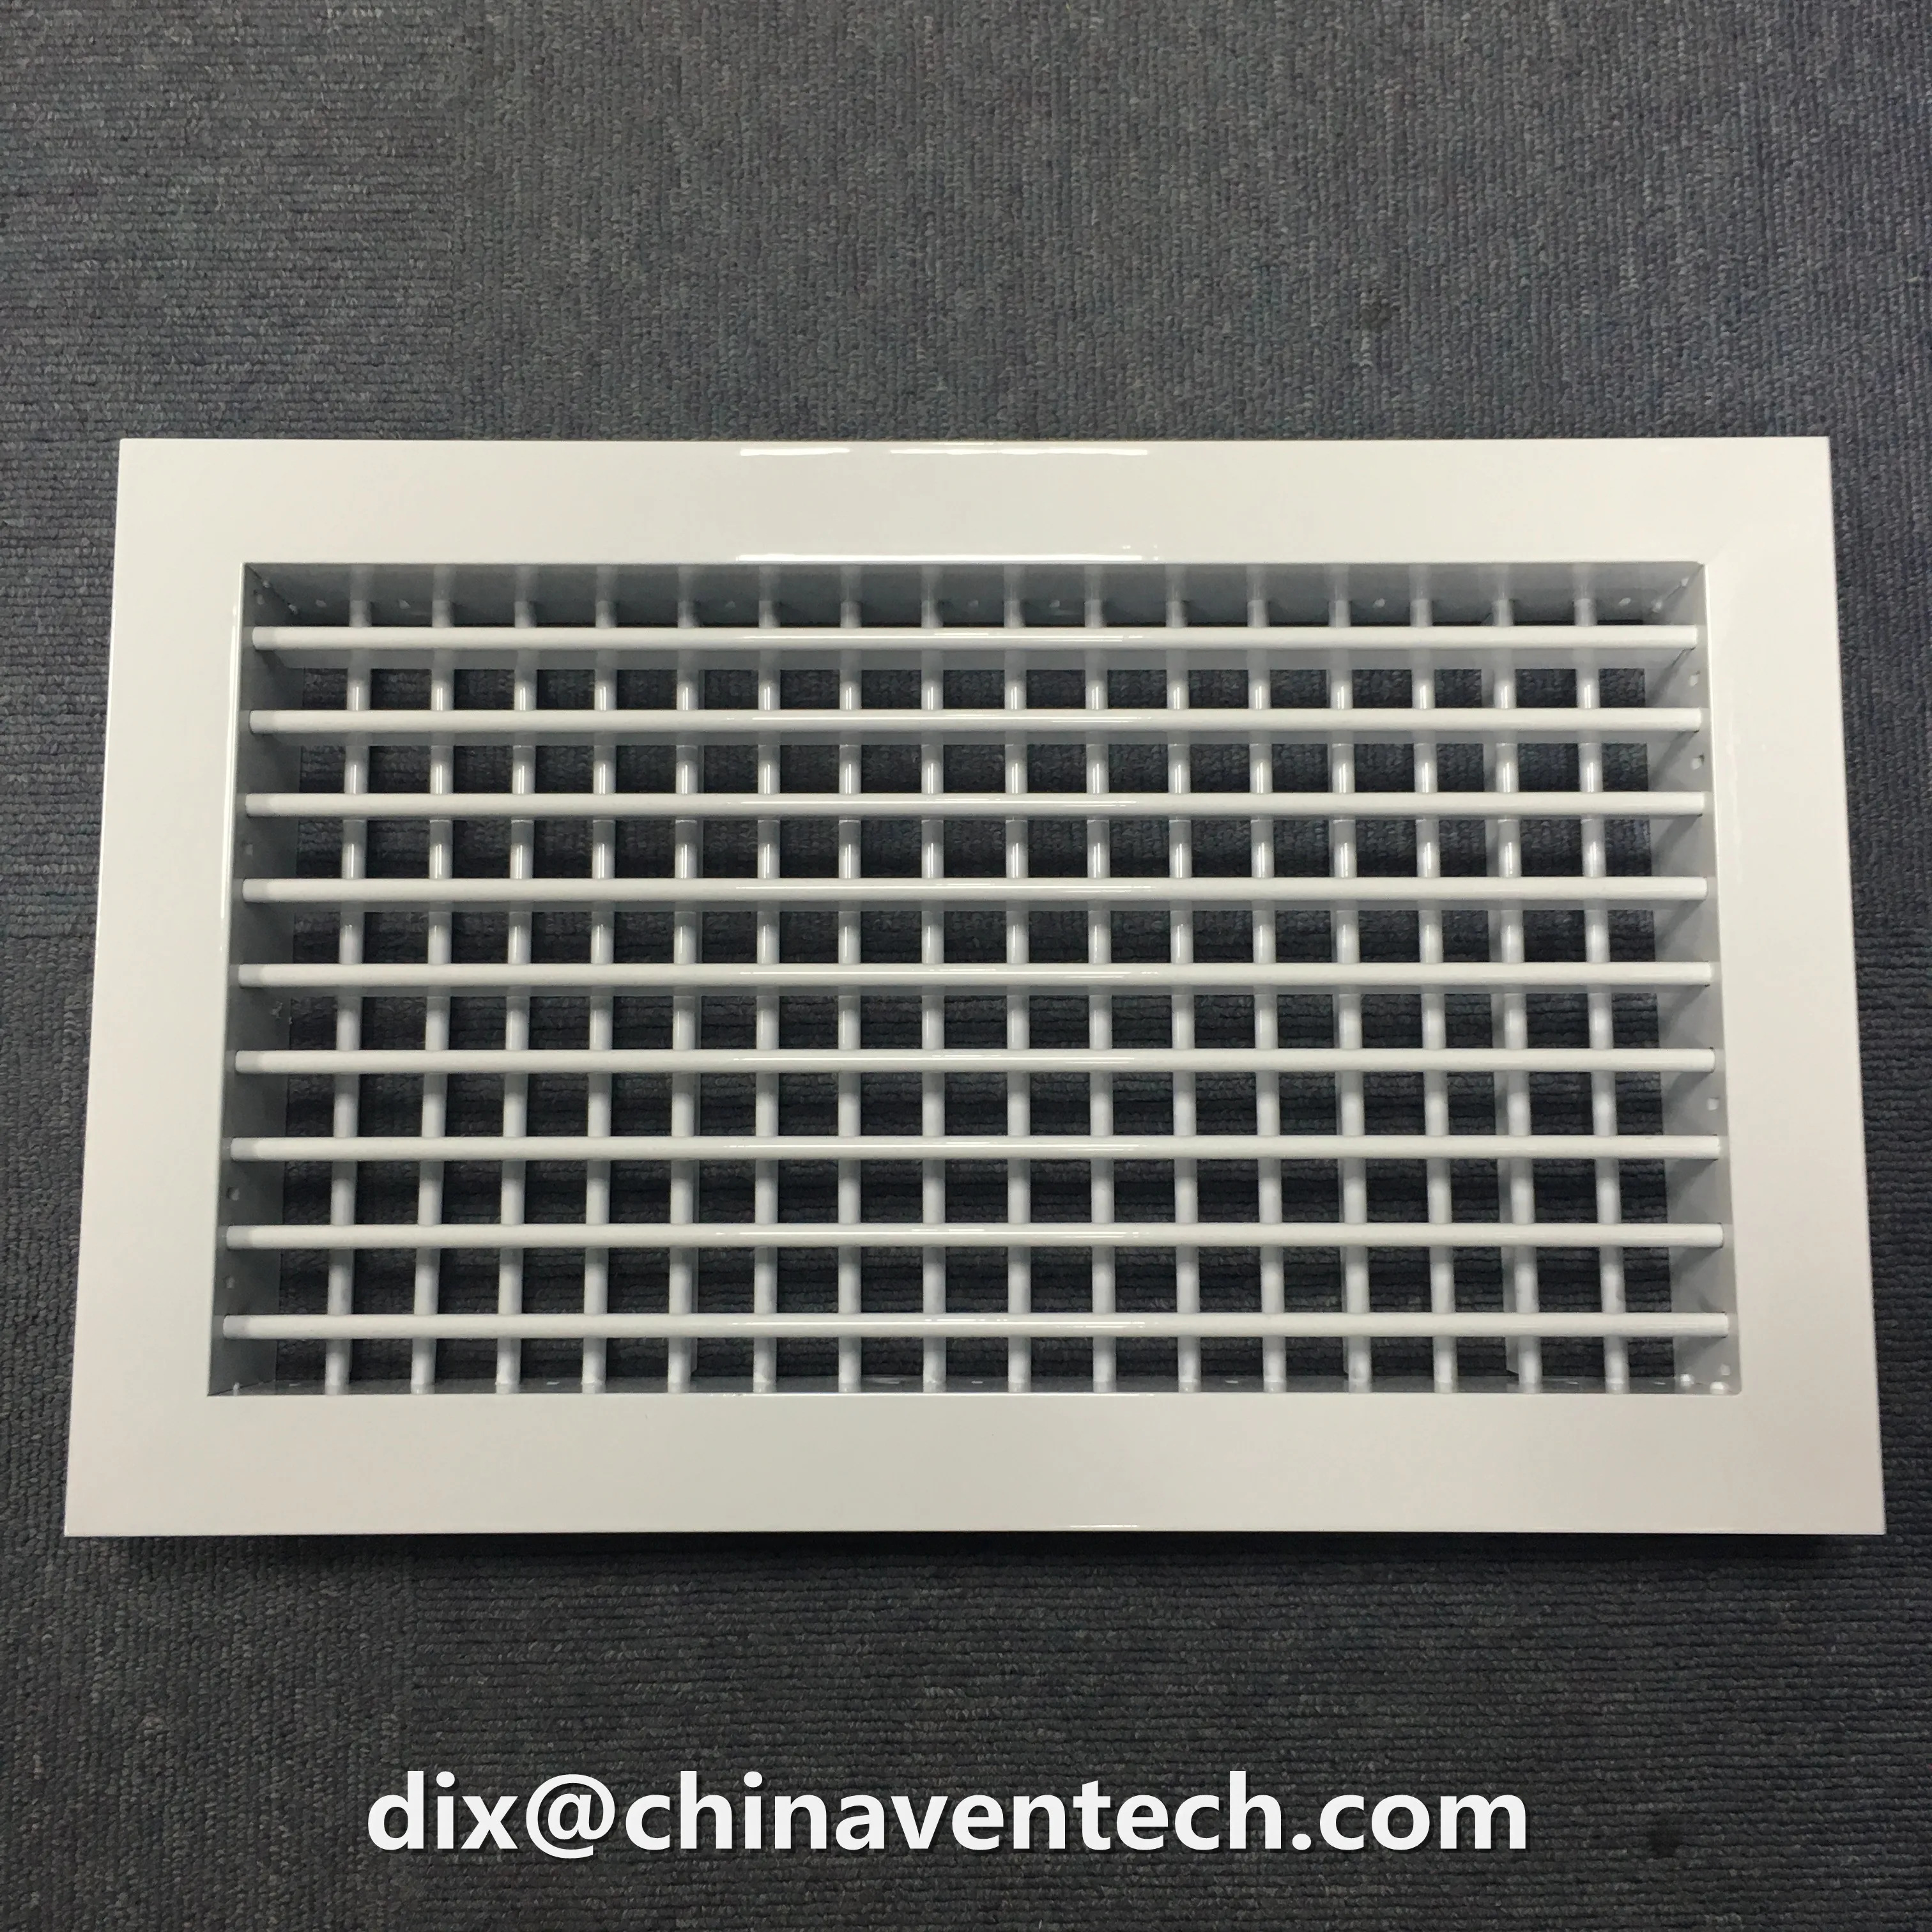 HVAC air conditioner supply air ventilation double deflection grille